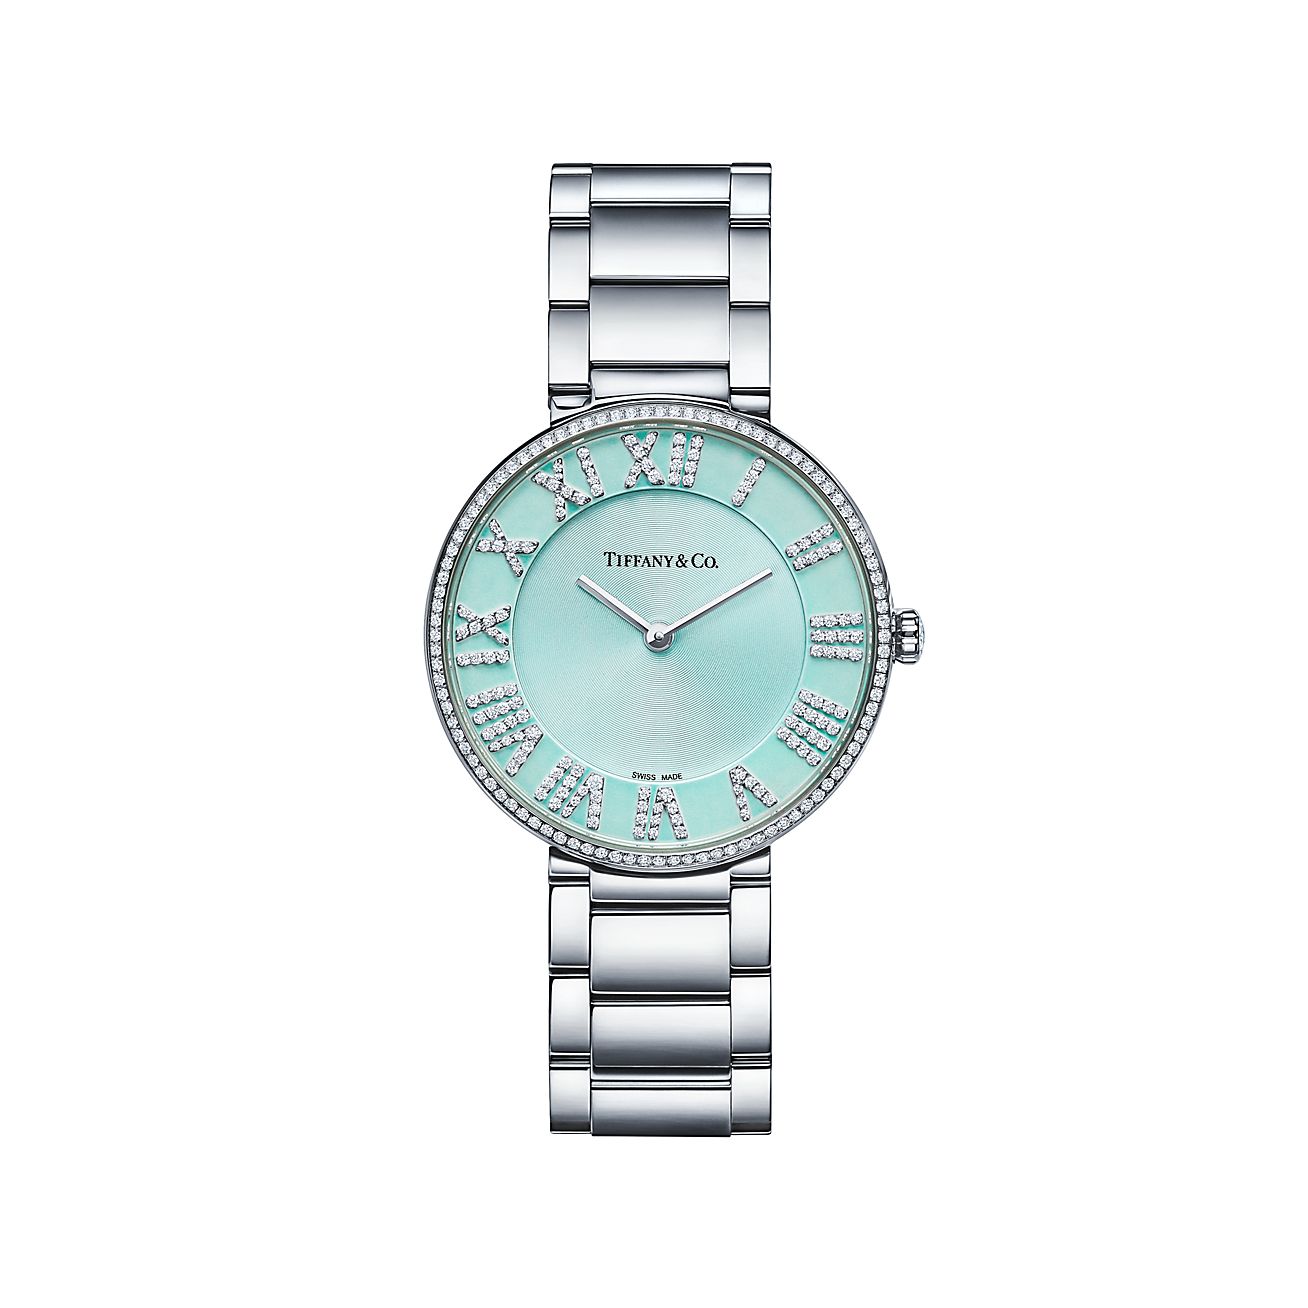 Atlas™ 34 mm Watch in Stainless Steel with Diamonds and a Tiffany 